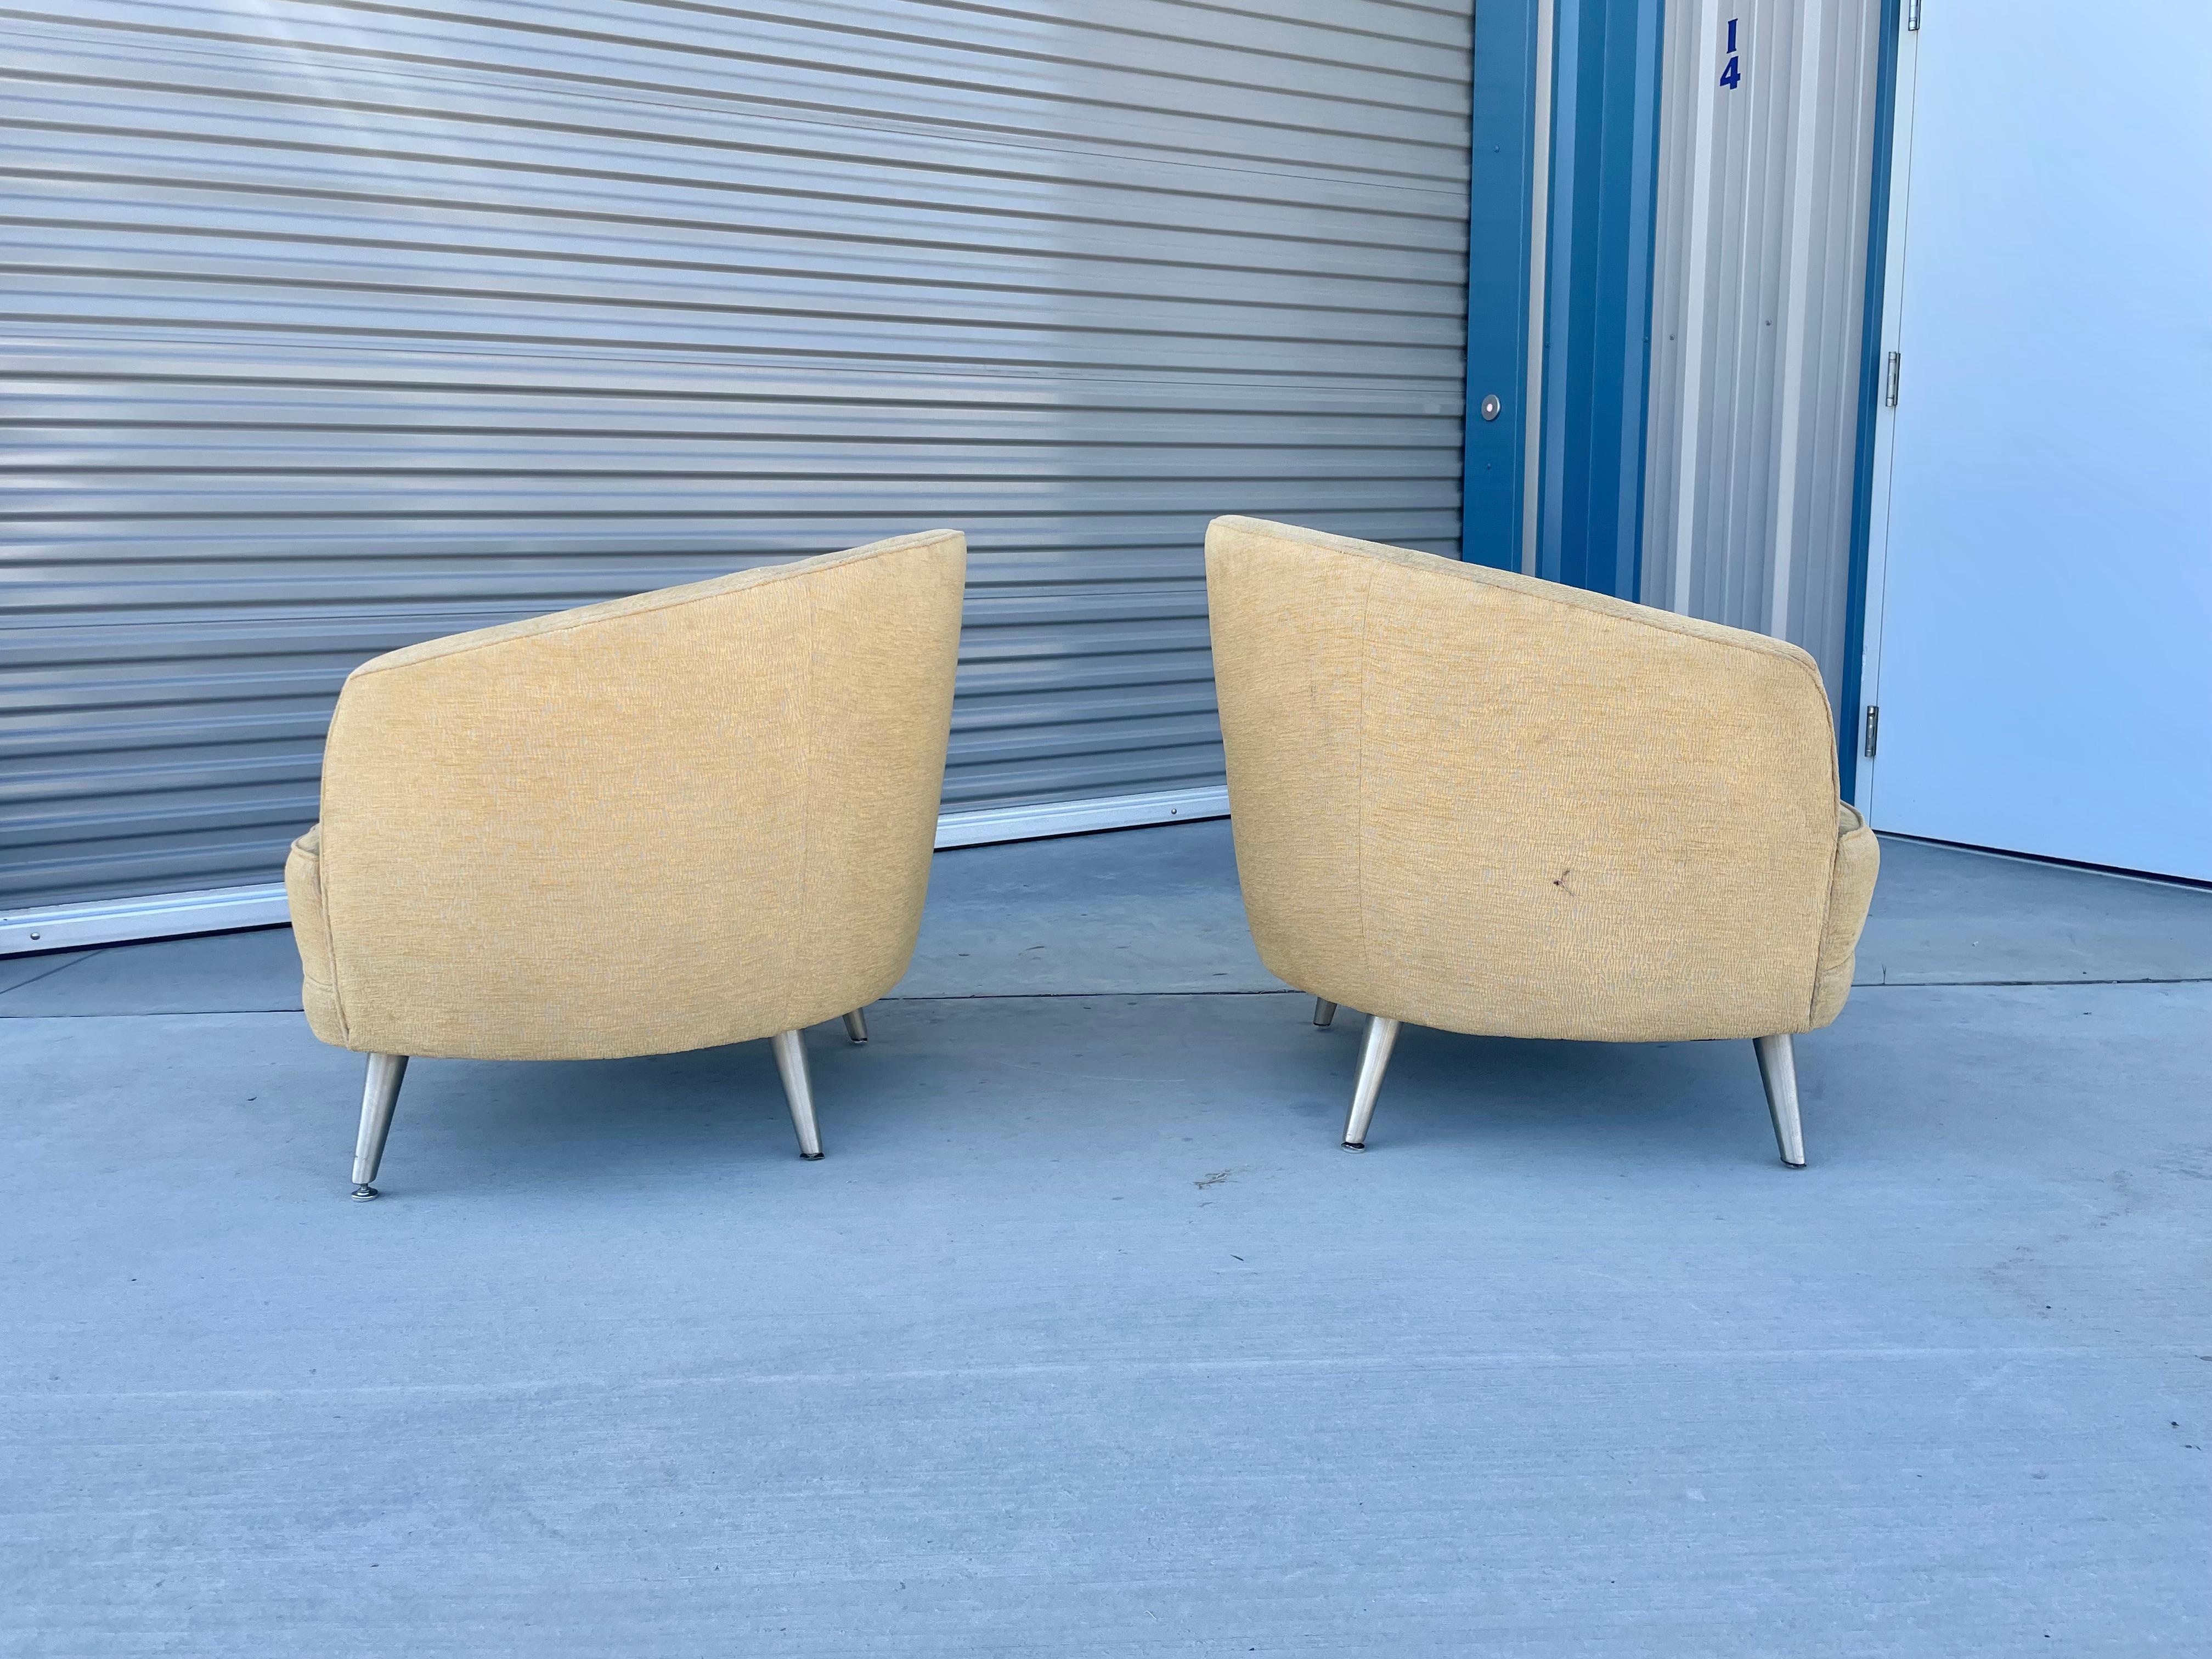 1970s Mid Century Modern Lounge Chairs In Good Condition For Sale In North Hollywood, CA